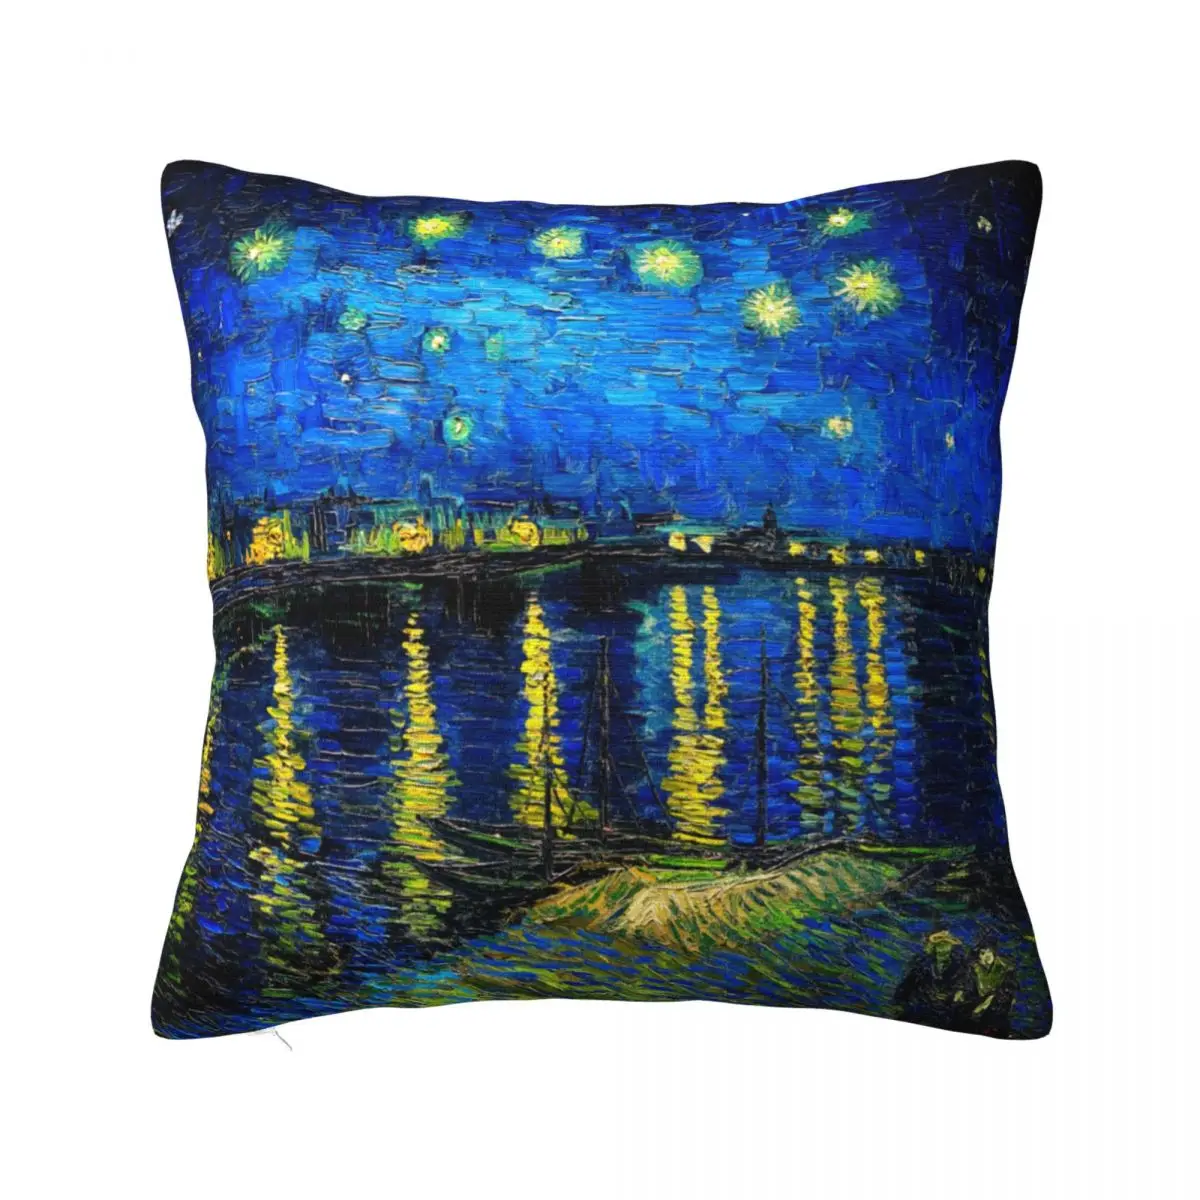 

Van Gogh Pillow Cover Starry Night Over the Rhone Soft Pillow Case Cushion Cover Novelty Graphic Pillowcases For Sofa Home Decor